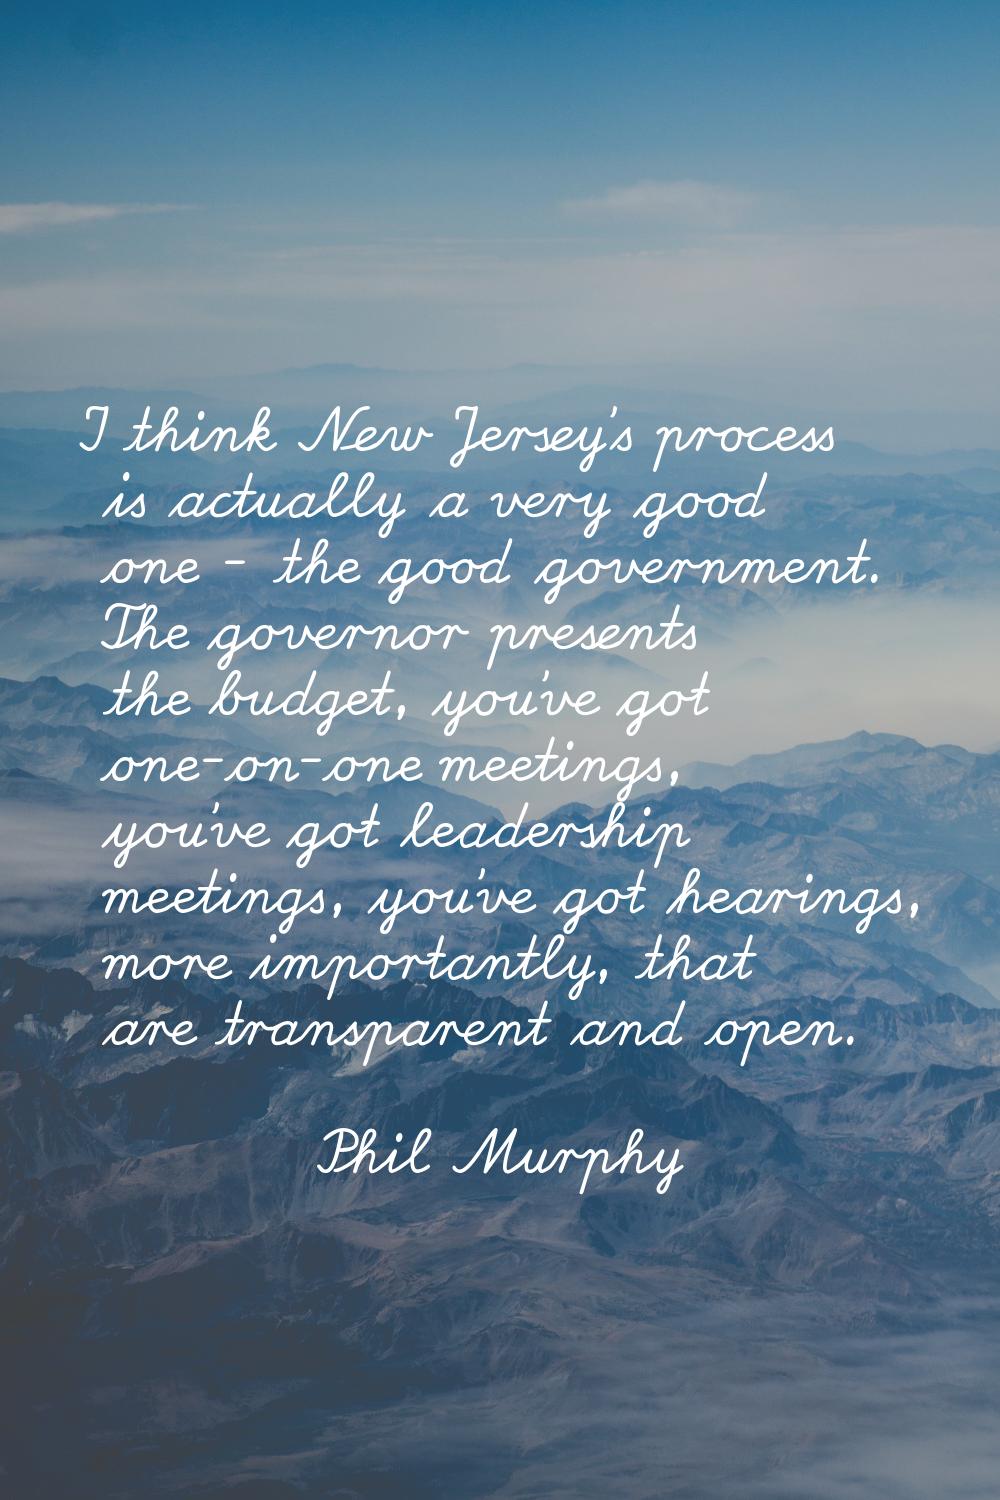 I think New Jersey's process is actually a very good one - the good government. The governor presen